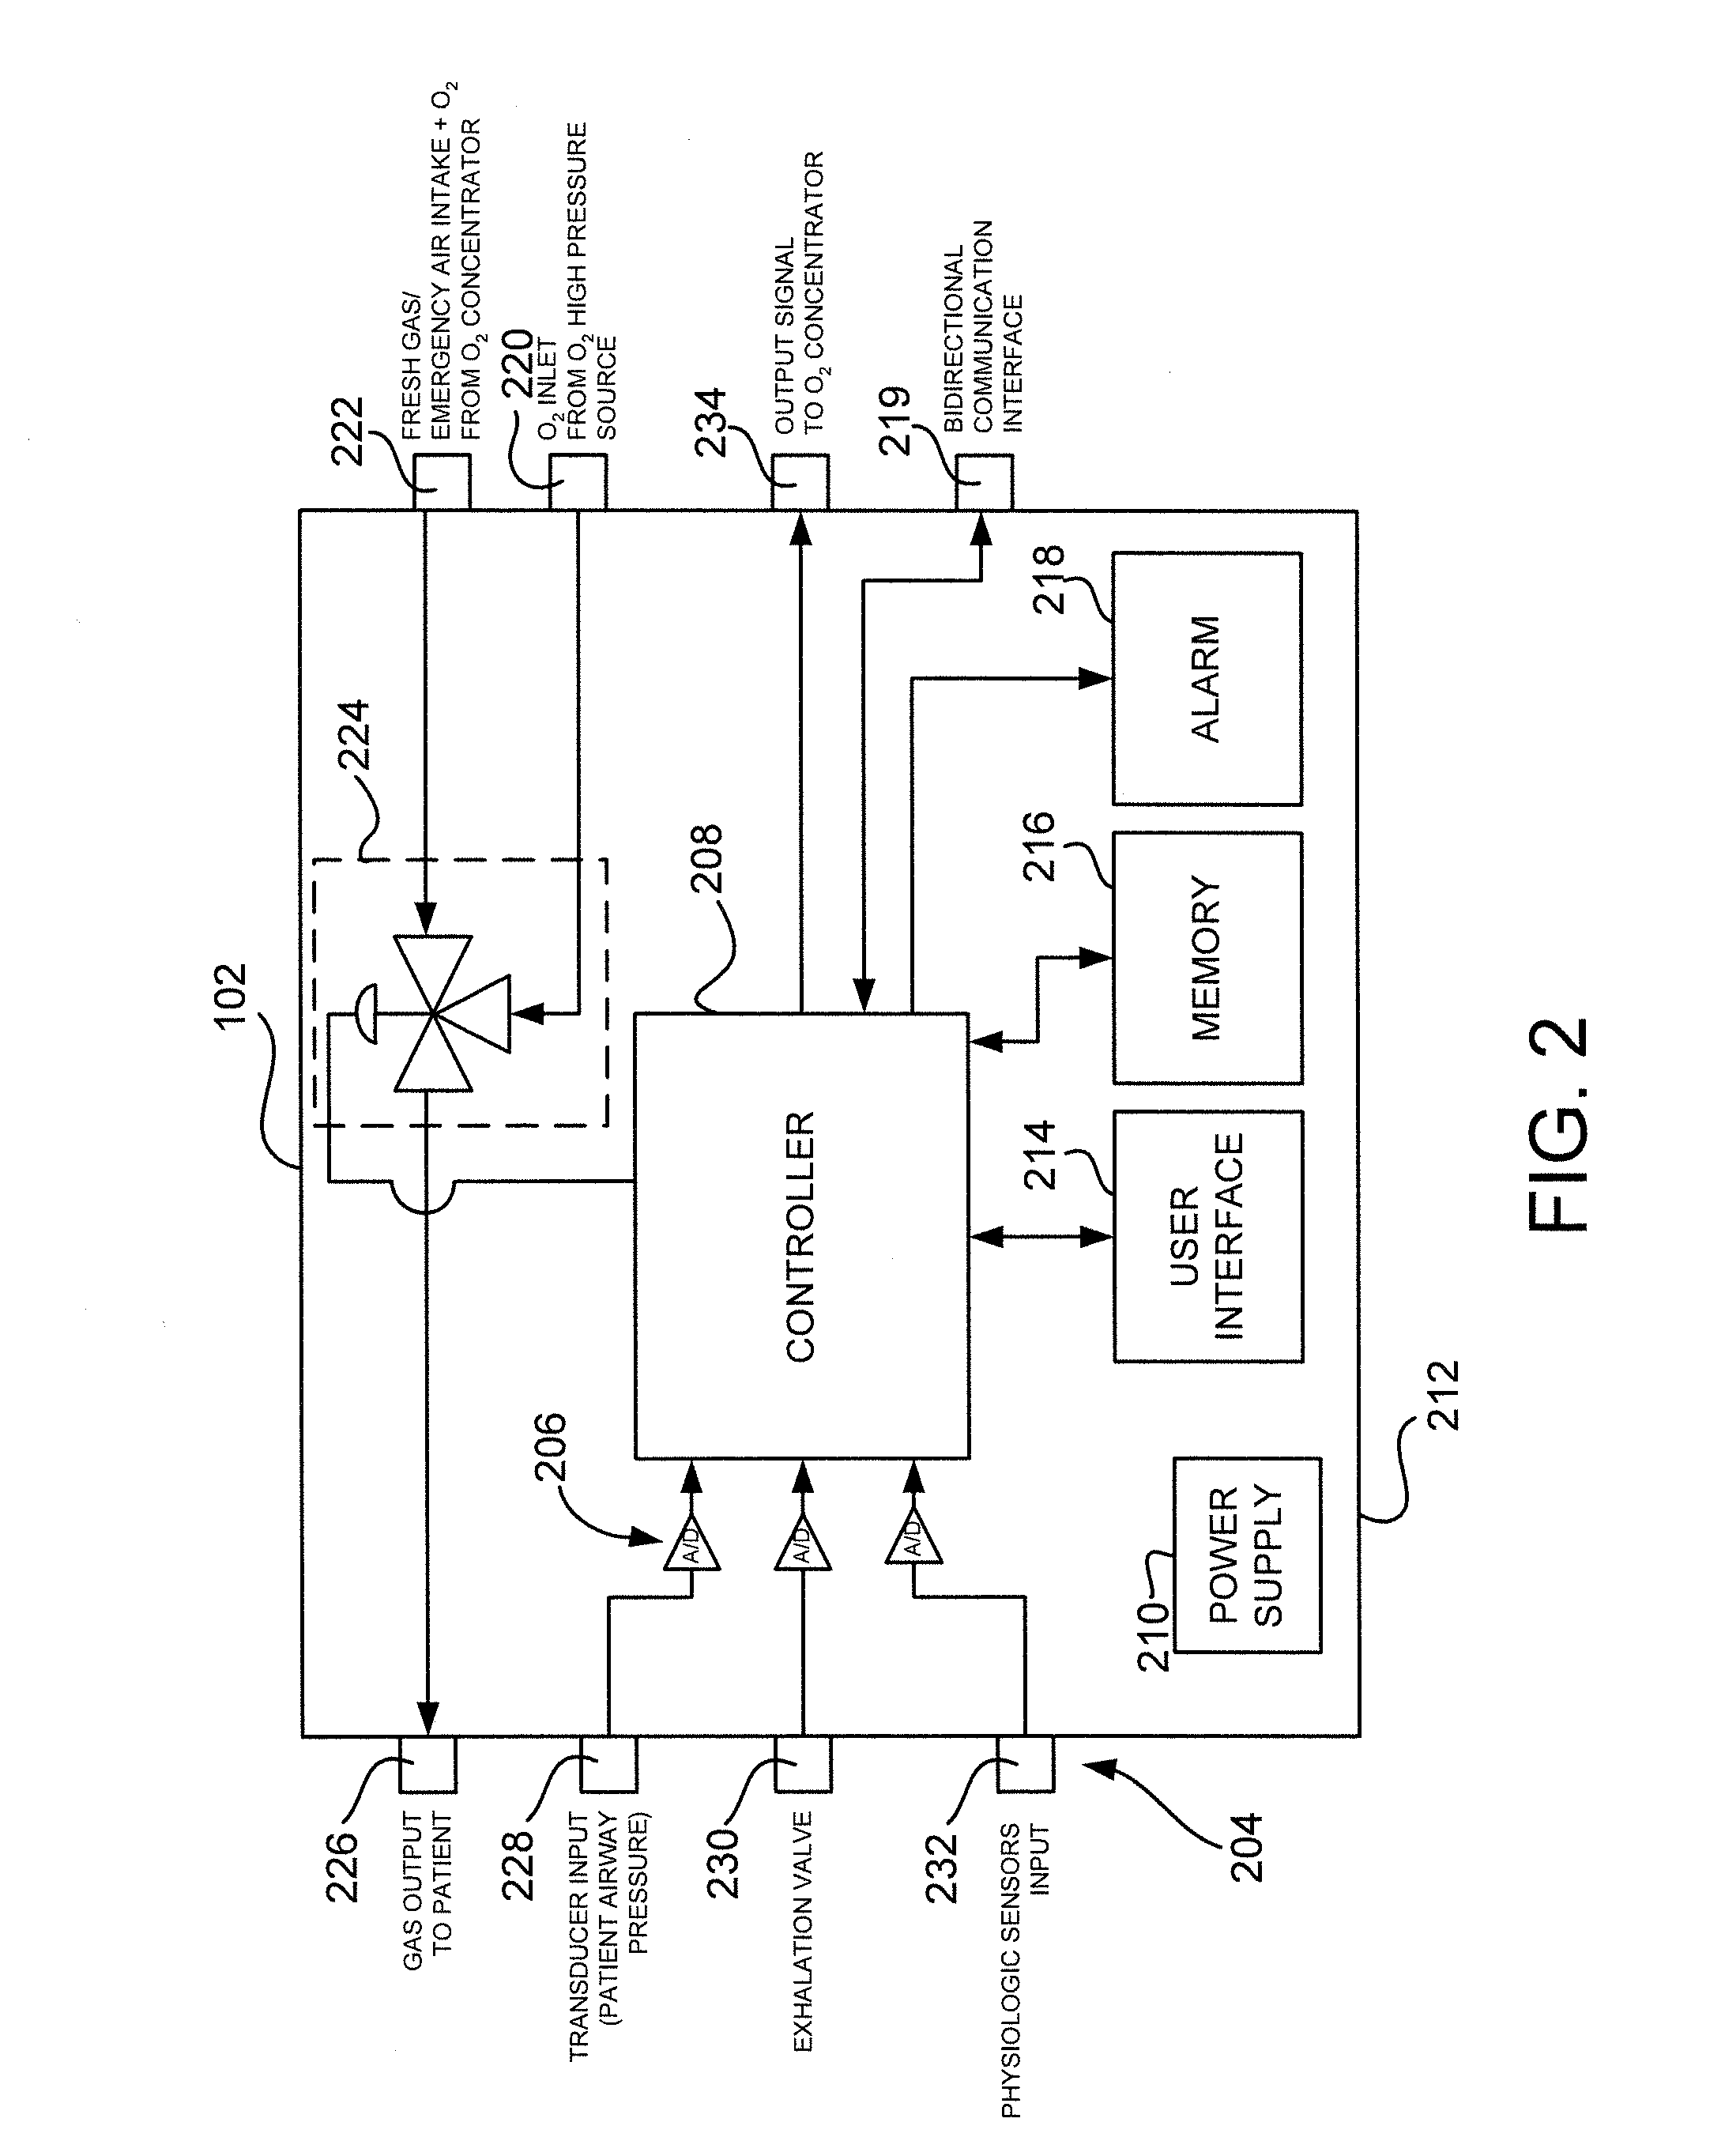 Life support and monitoring apparatus with malfunction correction guidance